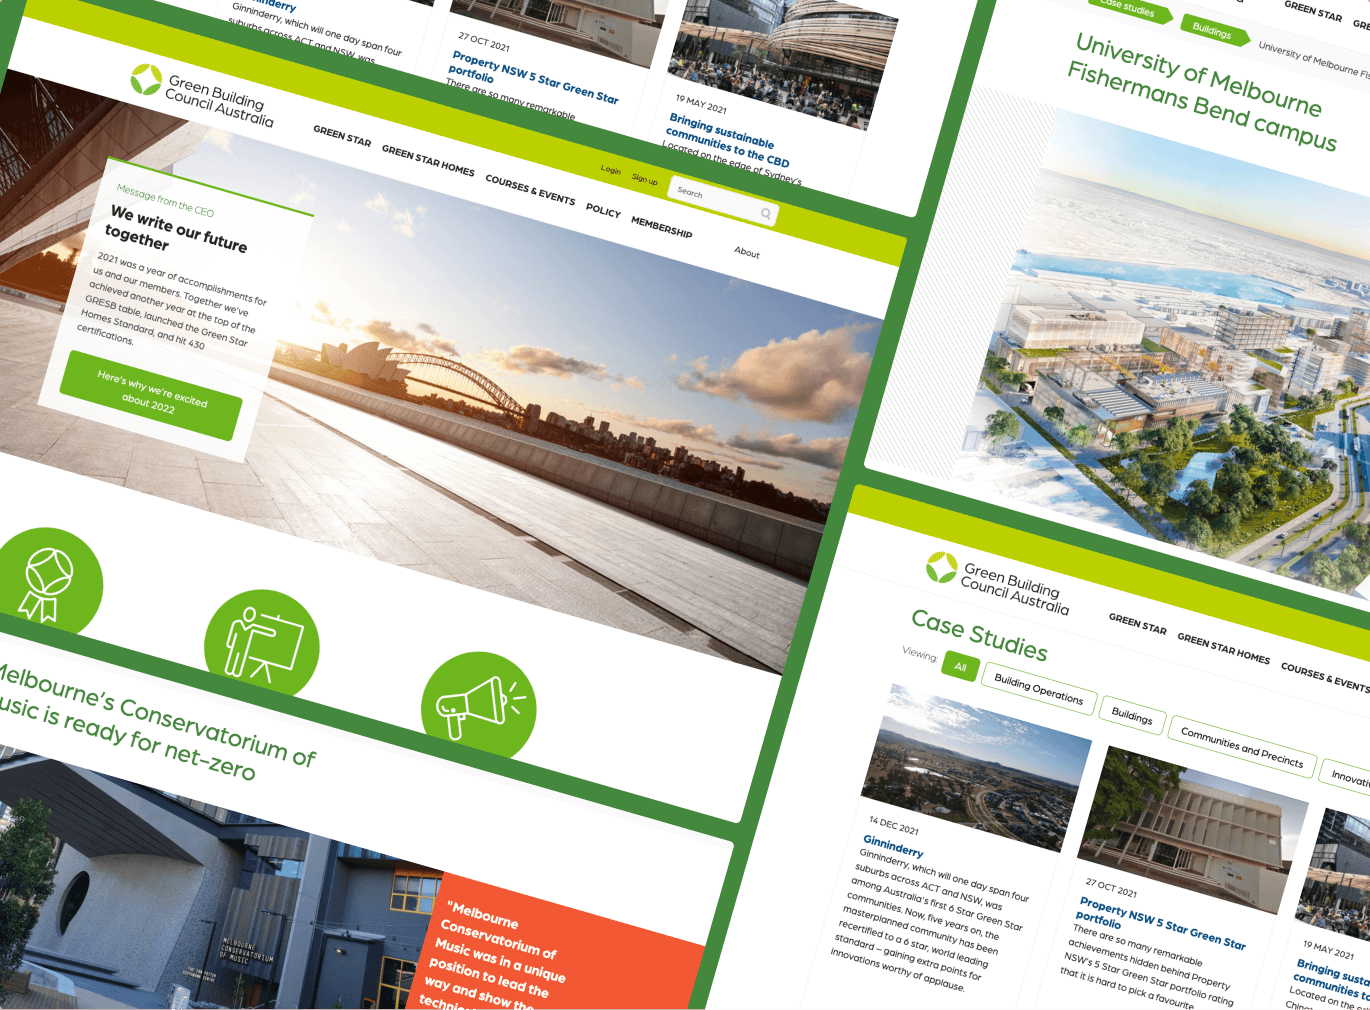 Screens of the Green Building Council of Australia website